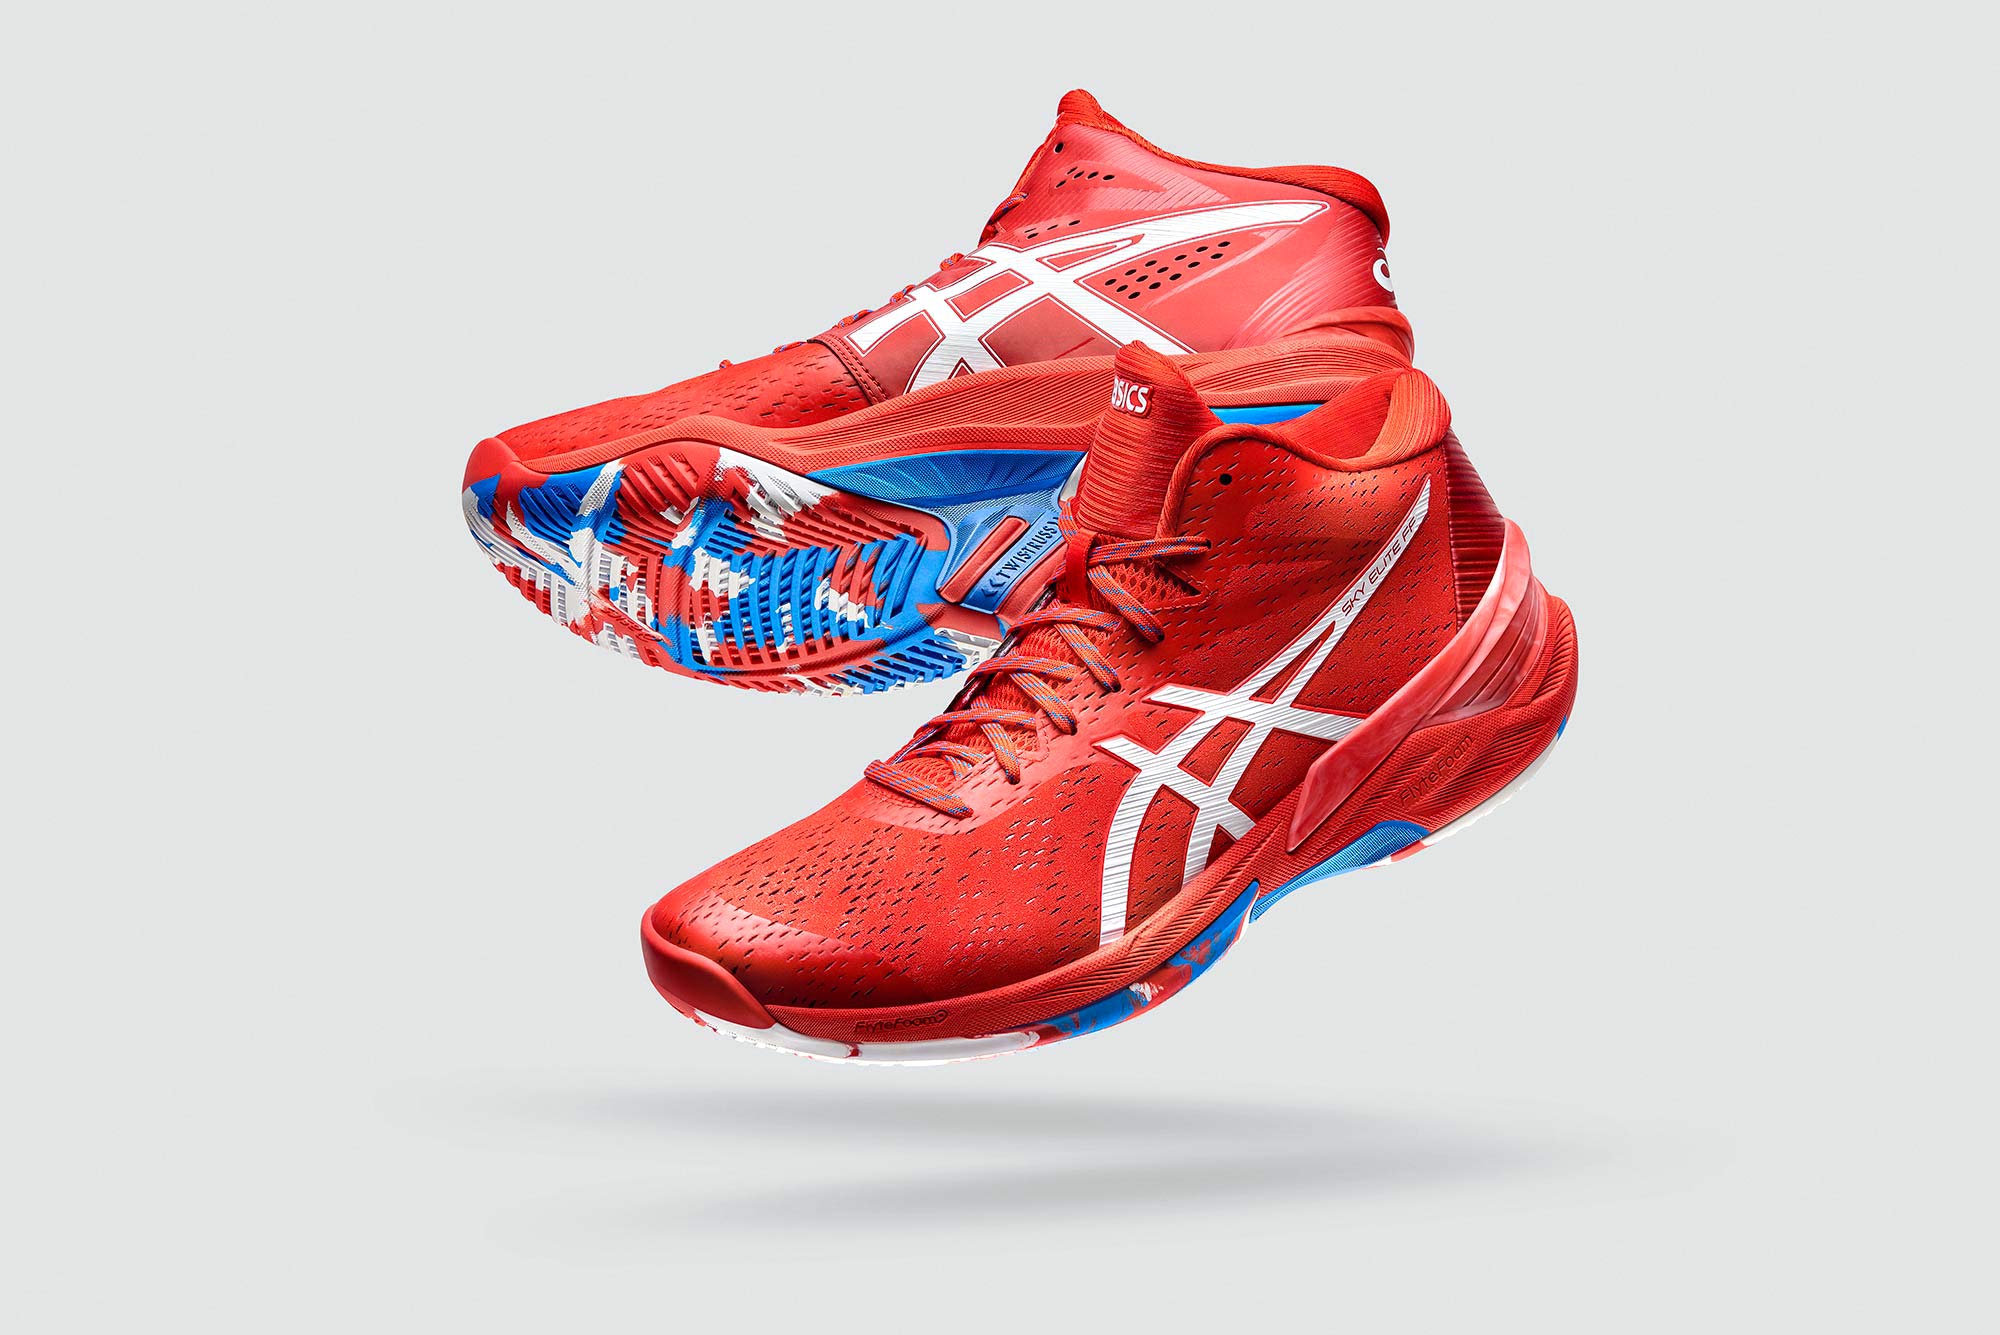 asics sky elite volleyball shoe 2020 commercial print campaign – product photography by devon krige